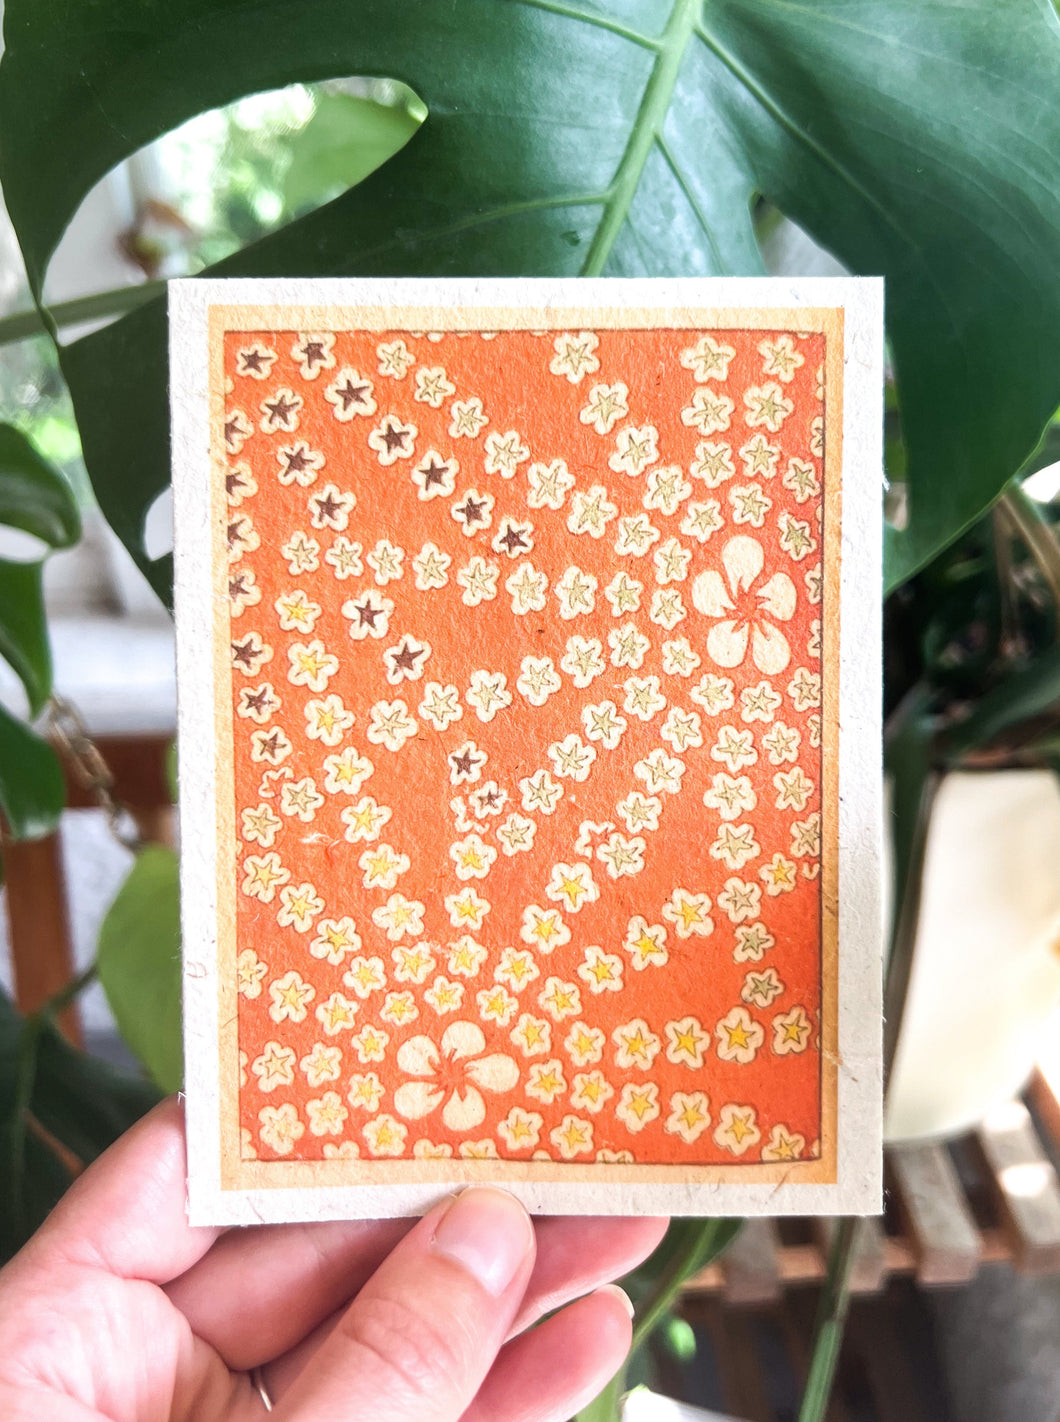 Japanese Plantable Seed Card || Zero Waste || Supports Women || Eco-friendly || J10